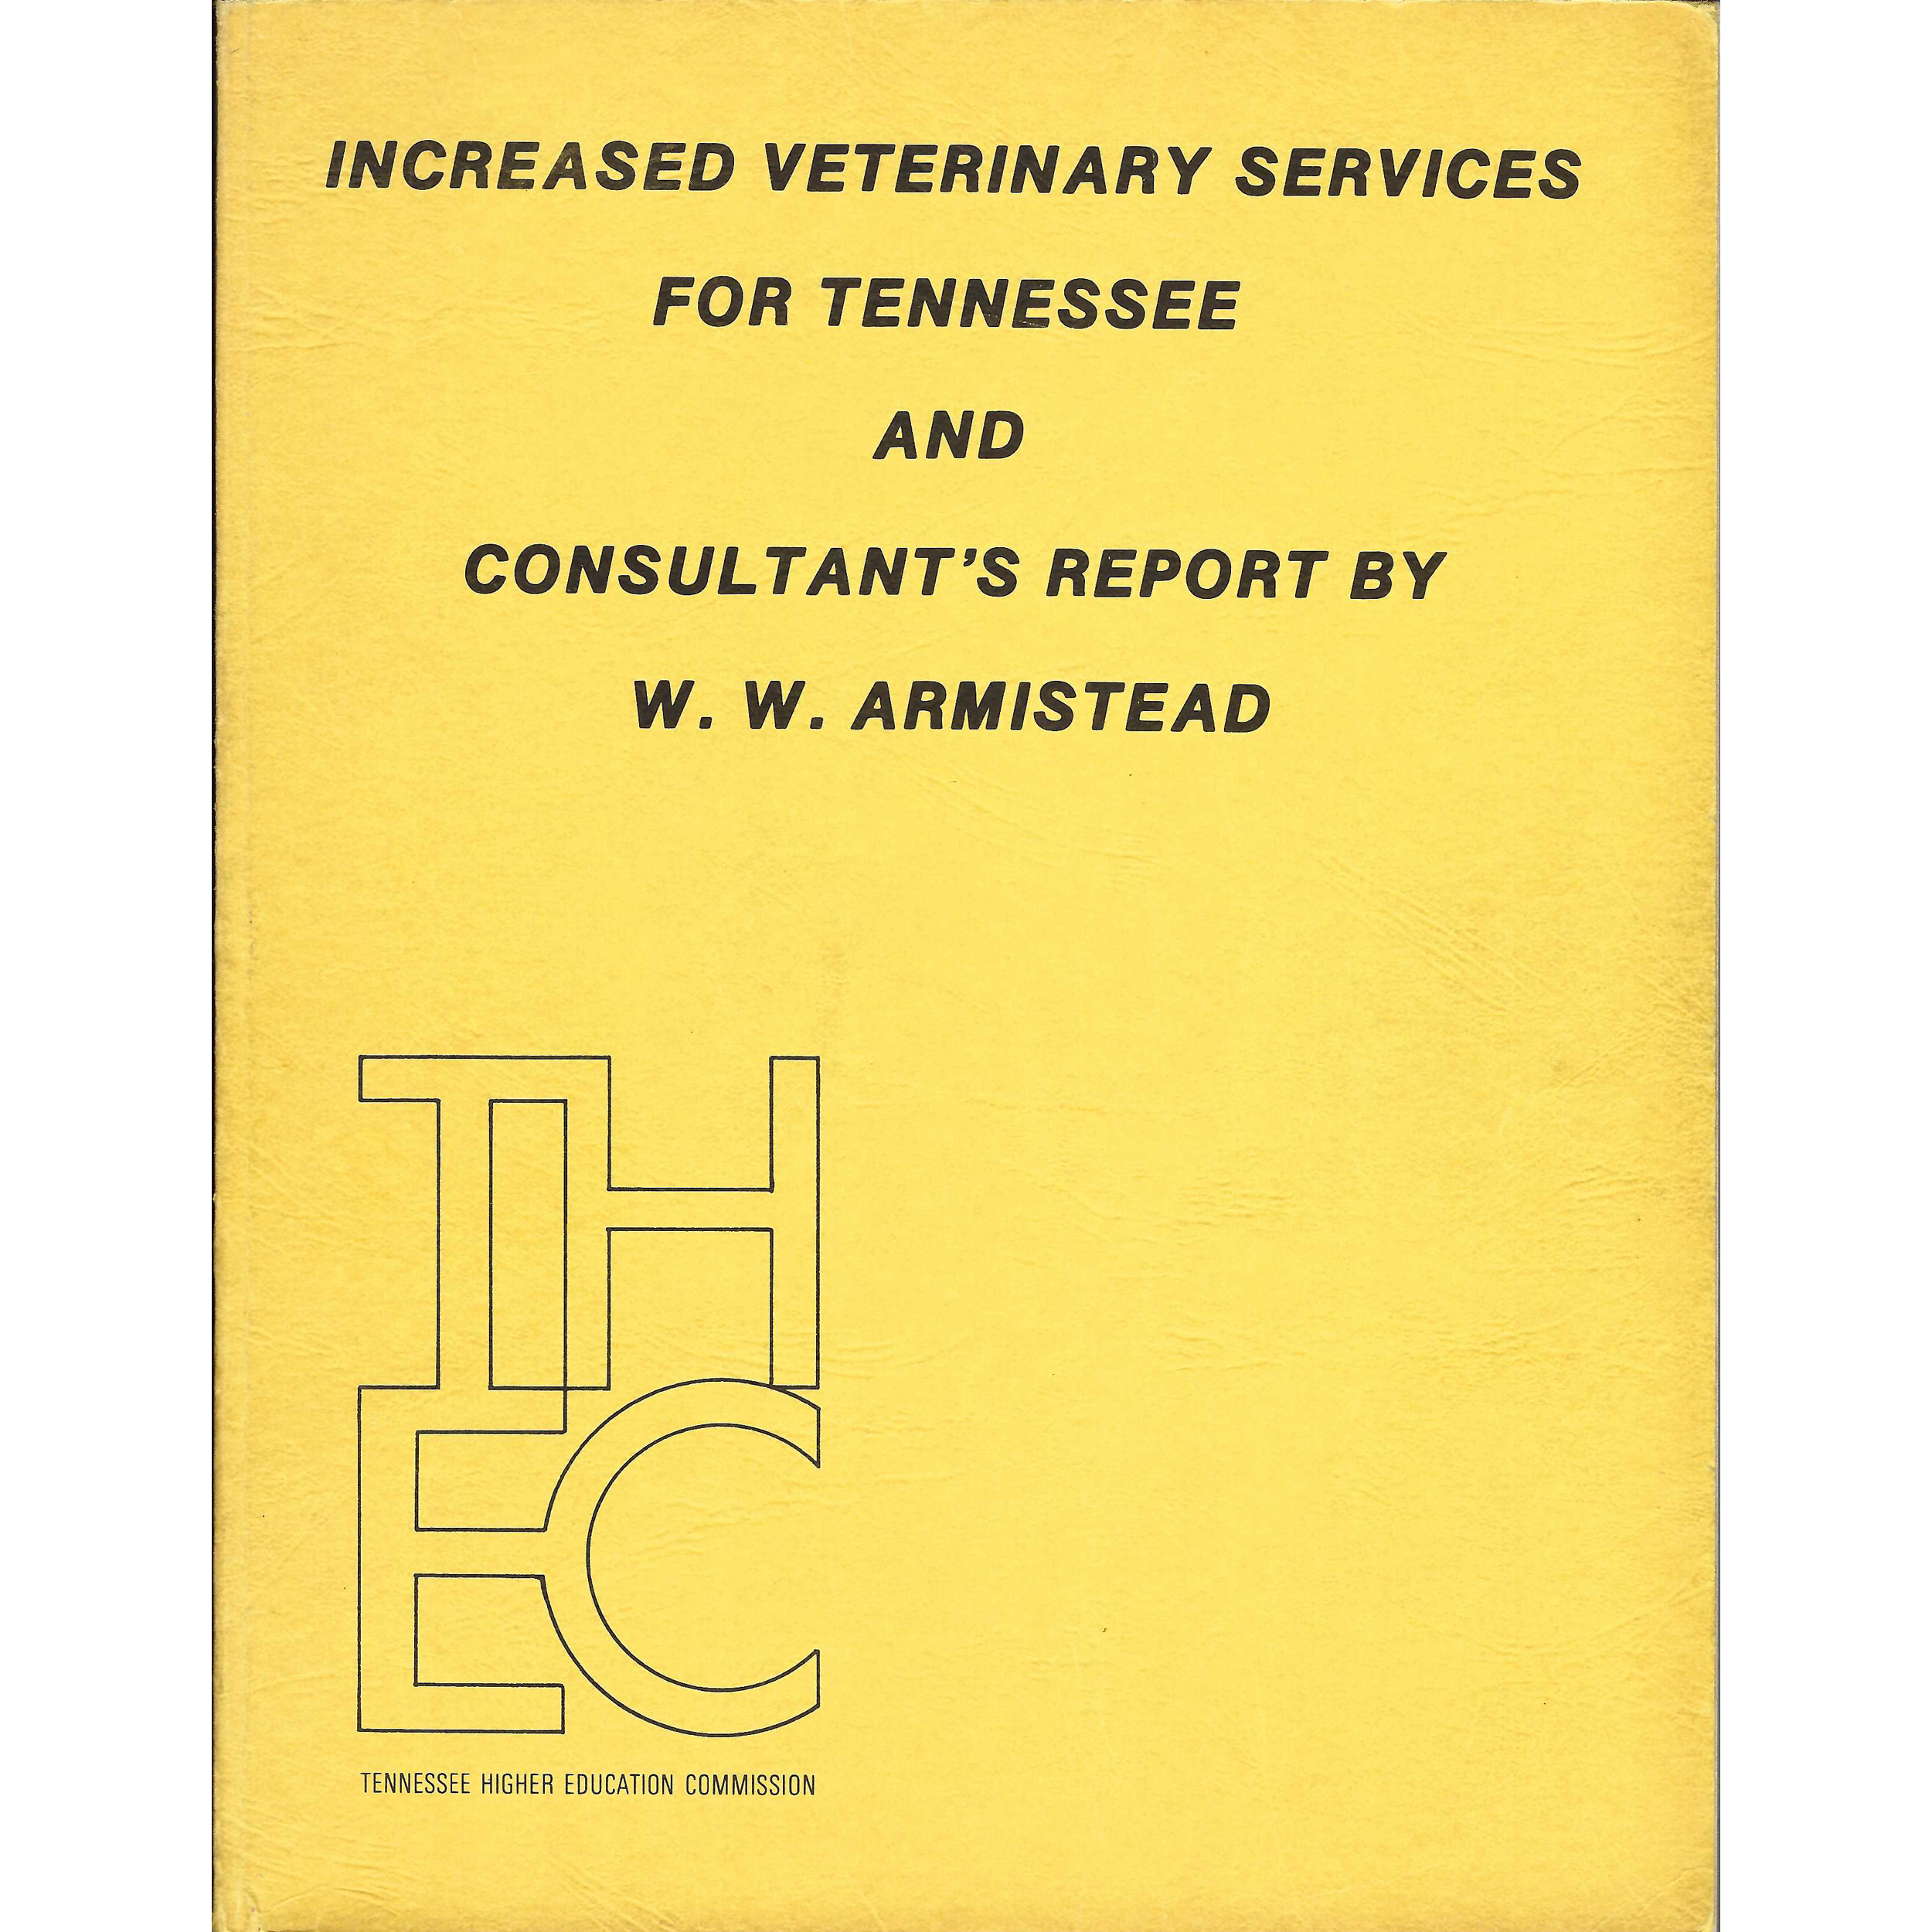 Cover of a multiple page feasibility study by W.W. Armistead in 1968. 